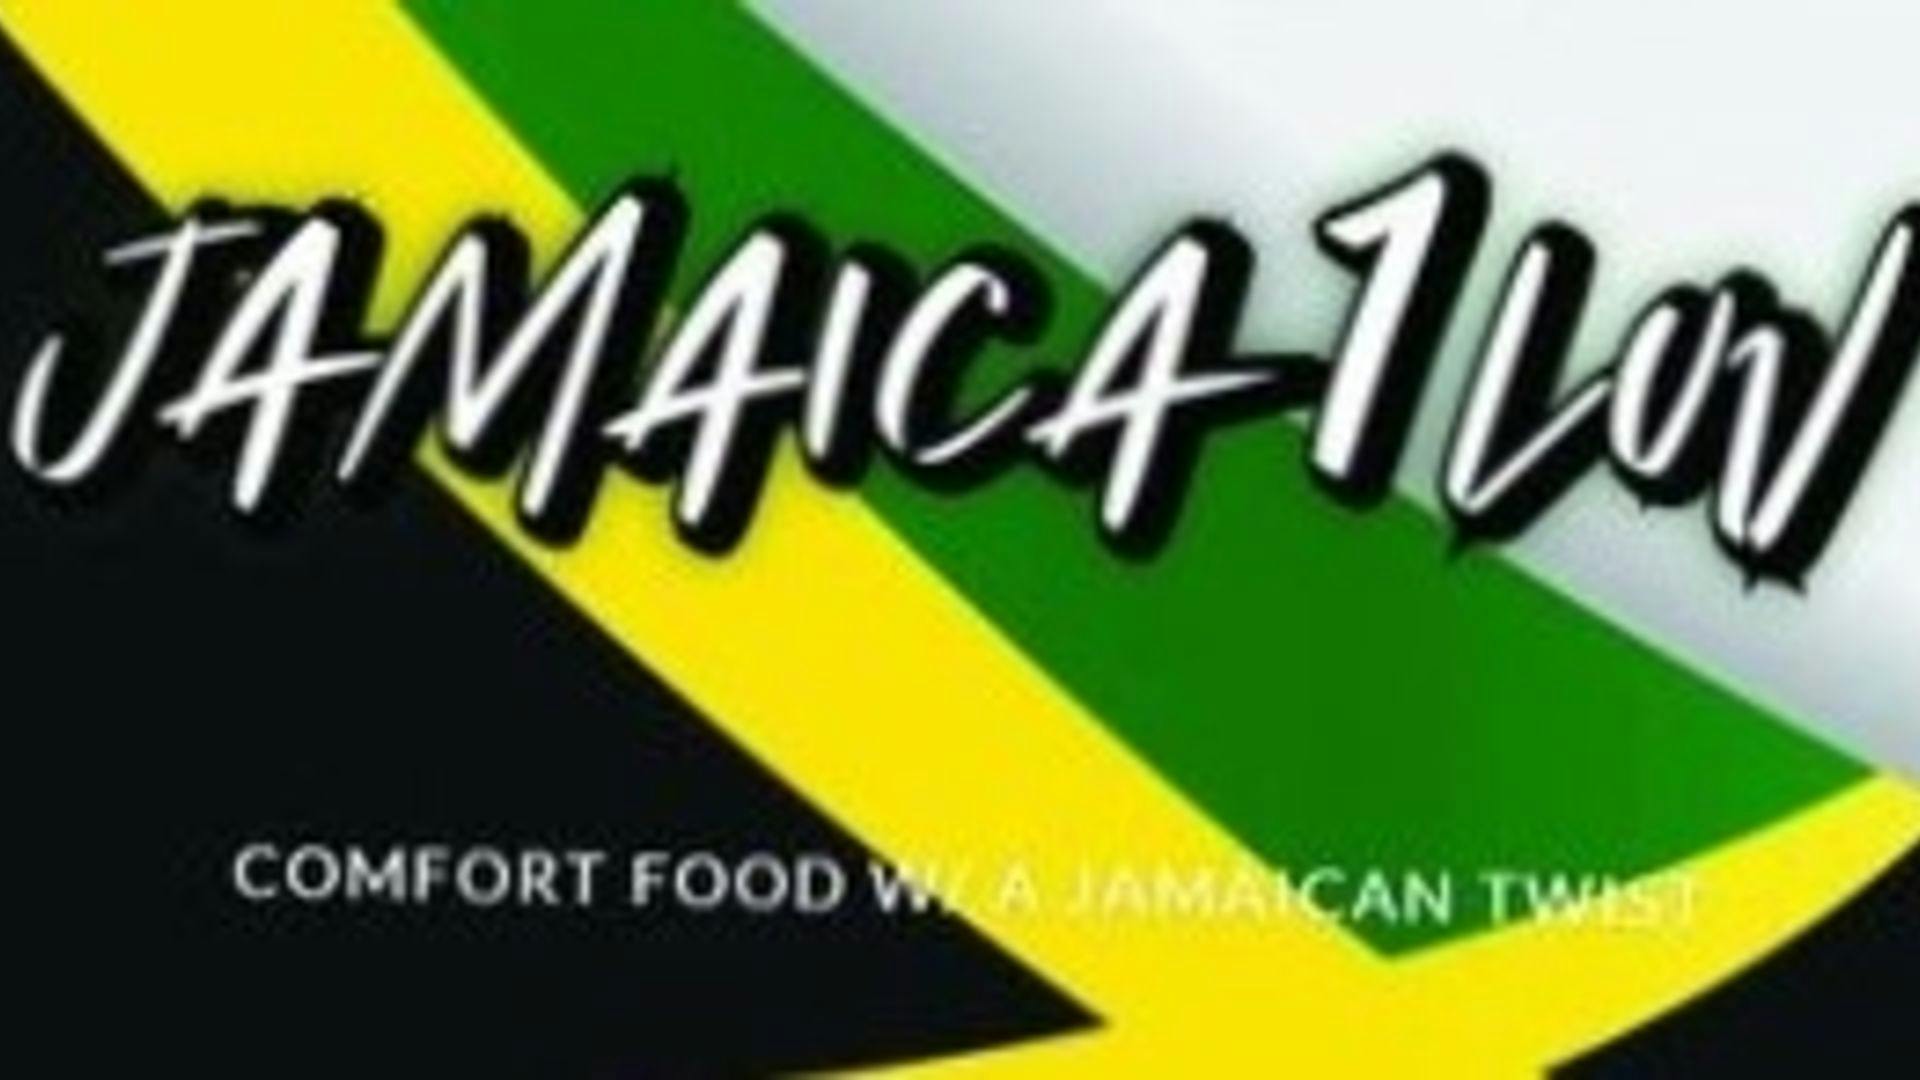 Jamaica 1 Luv cover image